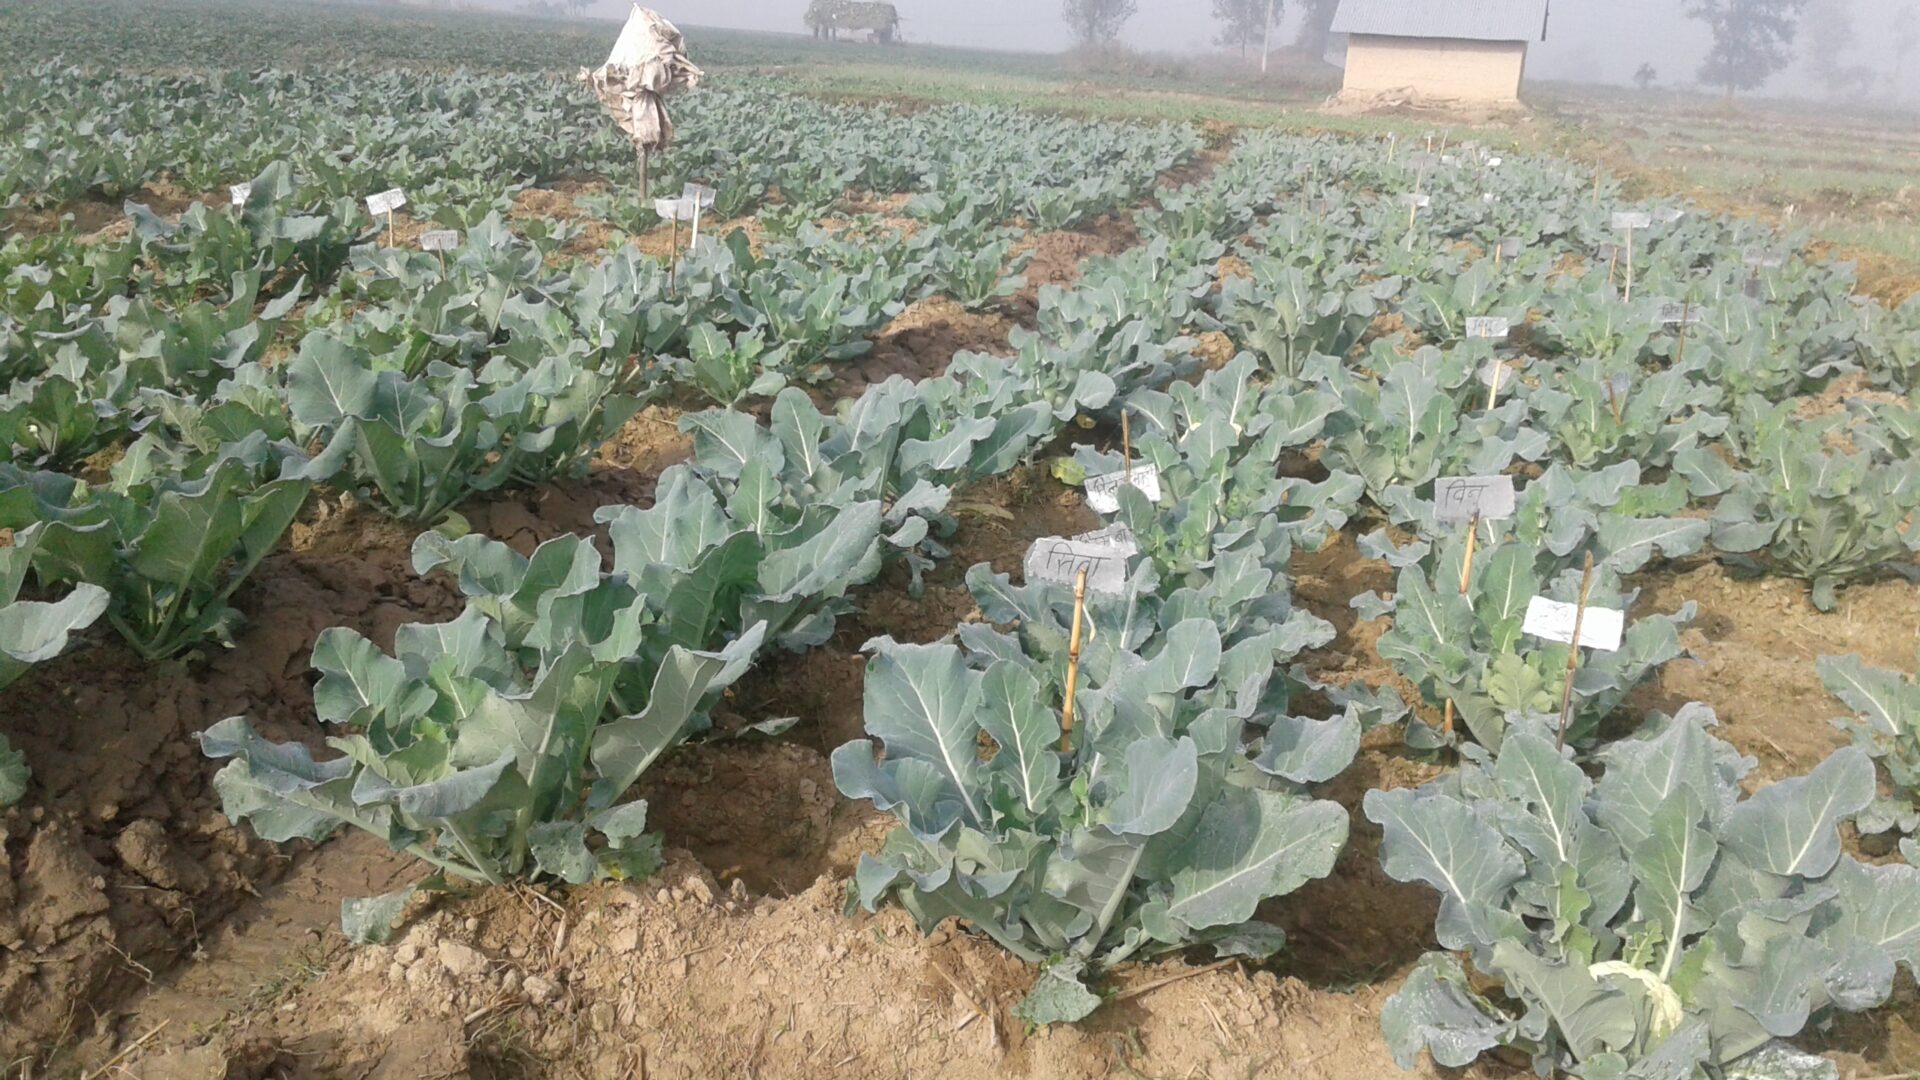 A field of broccoli with a person in the background.